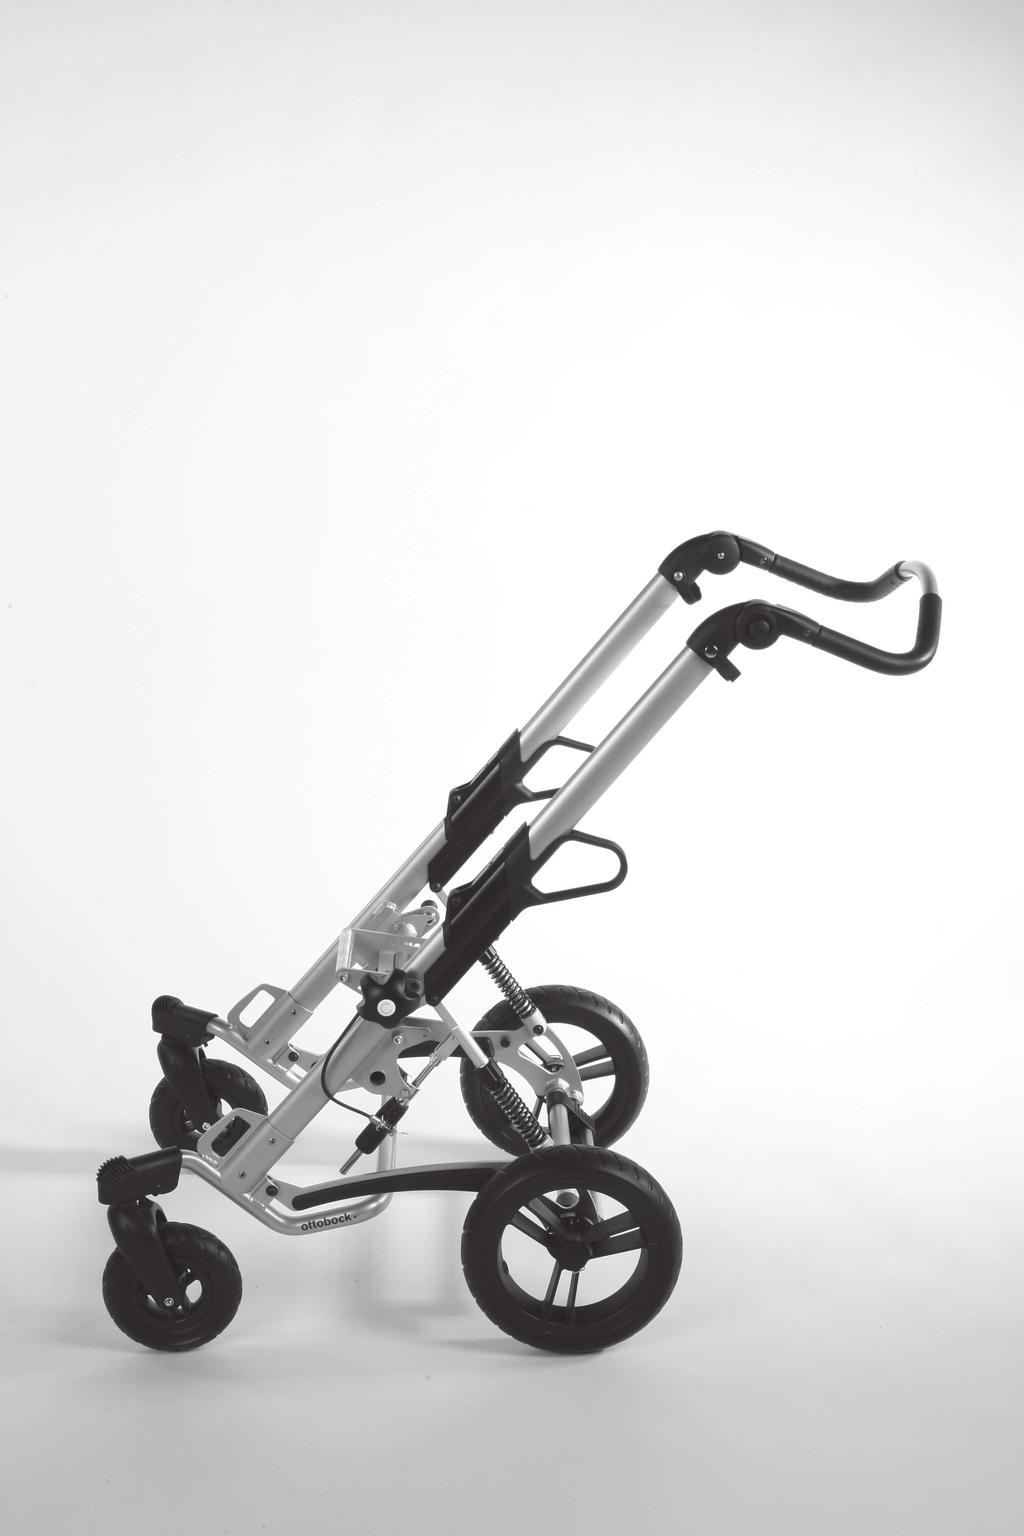 Product Description 2 outdoor mobility base with multifunctional seating unit and "swiveling" front wheels option 1 Plug-on rear wheel 6 Adjustable push bar 2 "Swiveling" front